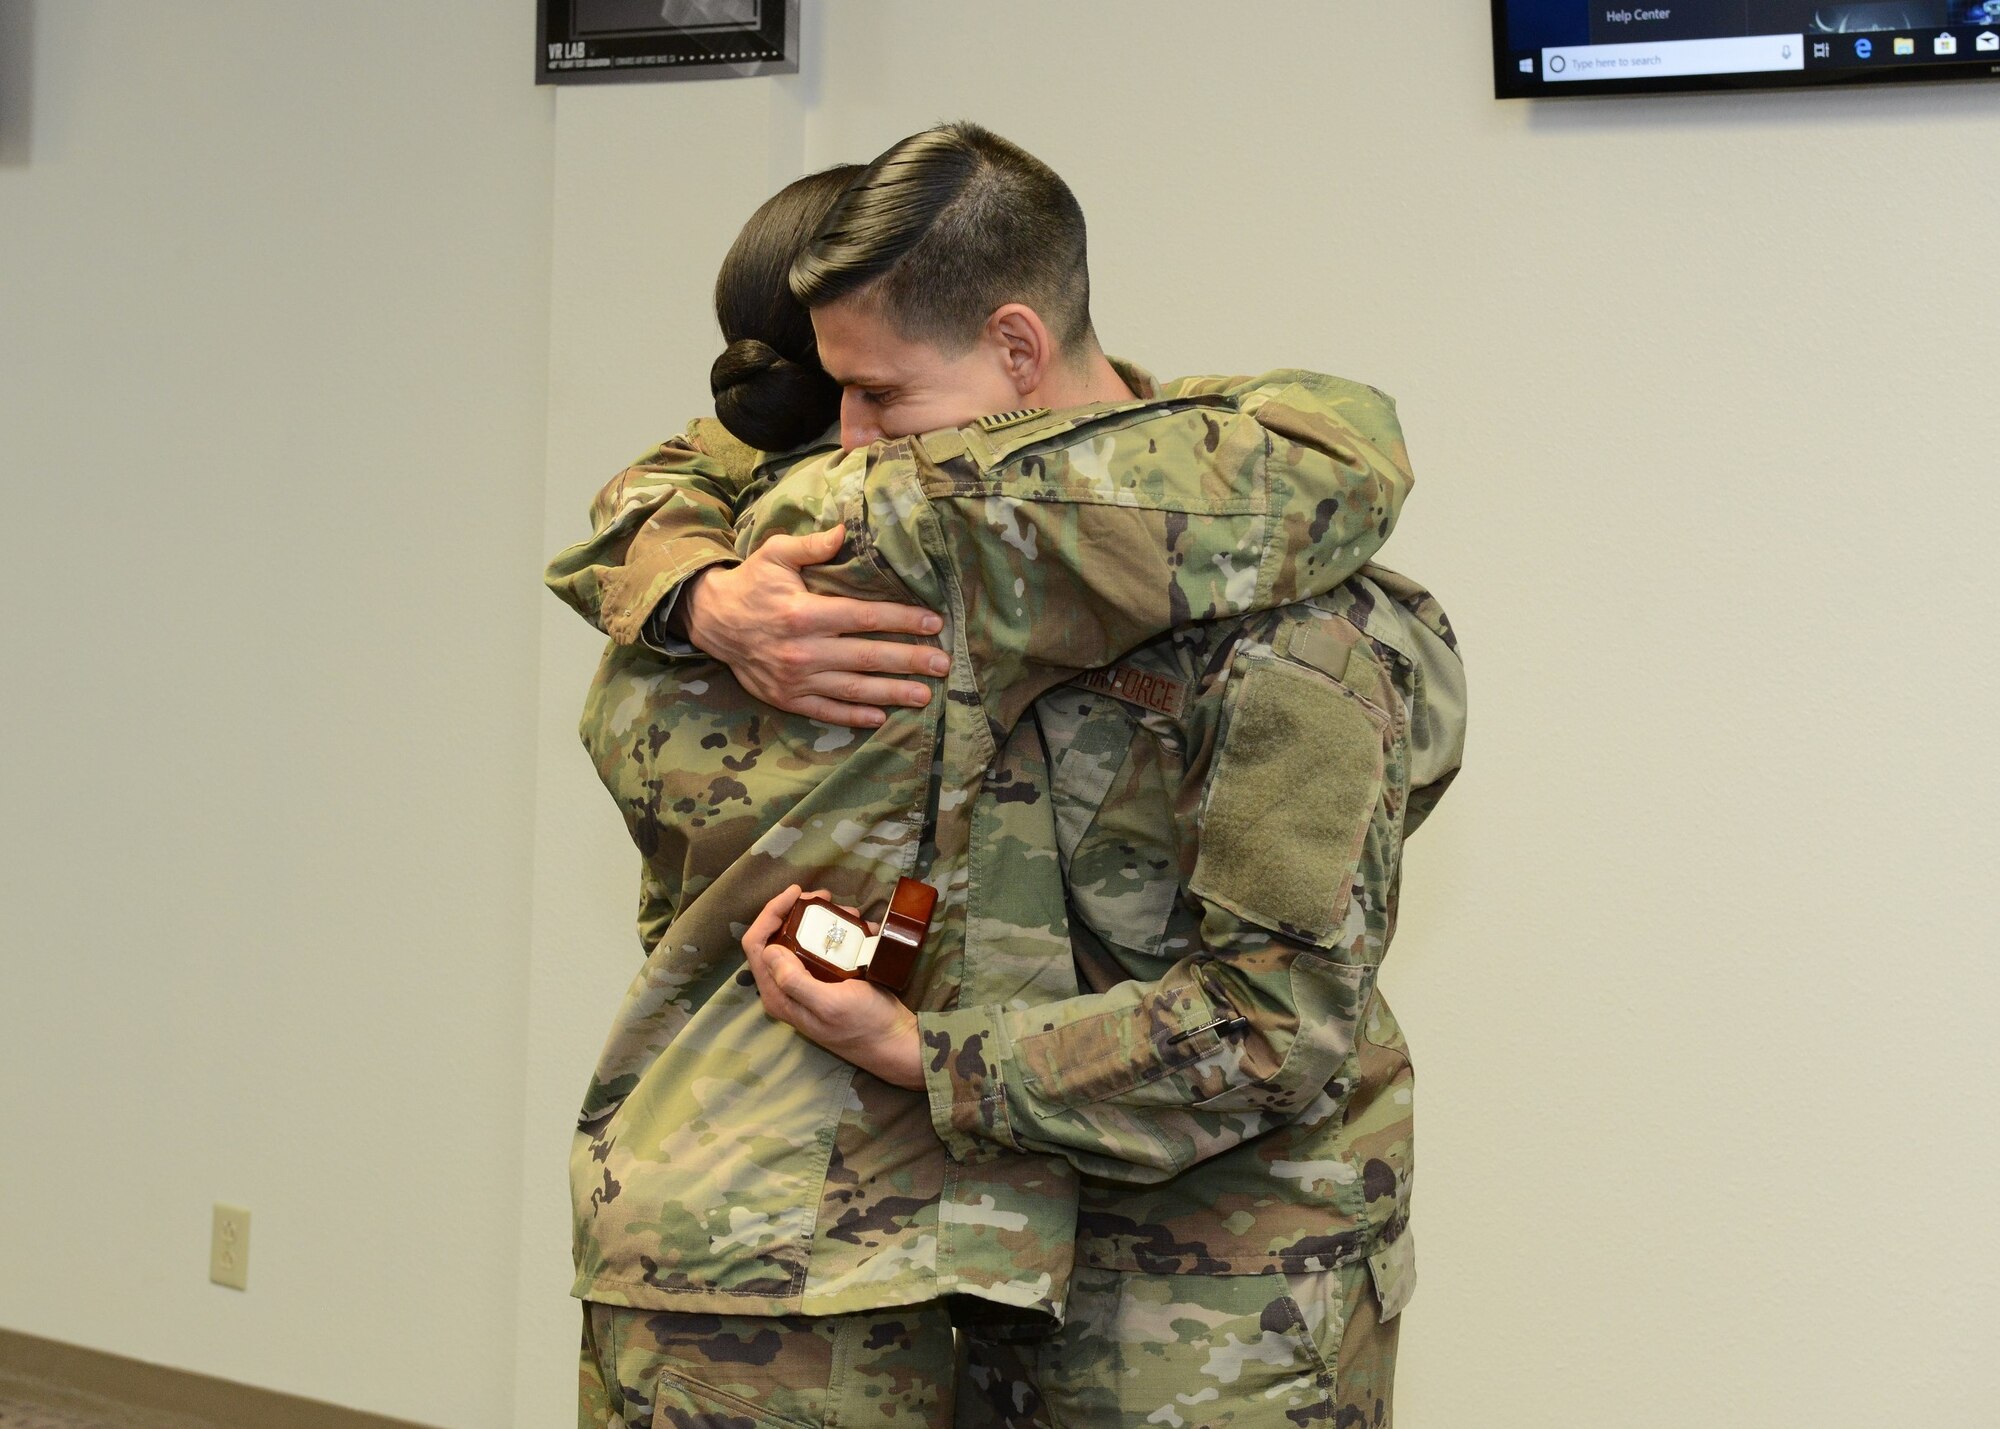 Tech. Sgt. Jeremy Neilson, 412th Aircraft Maintenance Squadron, hugs Staff Sgt. Nori Sannoh, 432nd Maintenance Group, Nellis Air Force Base, Nevada, after he surprised her with a marriage proposal Dec. 20, 2018. (U.S. Air Force photo by Kenji Thuloweit)